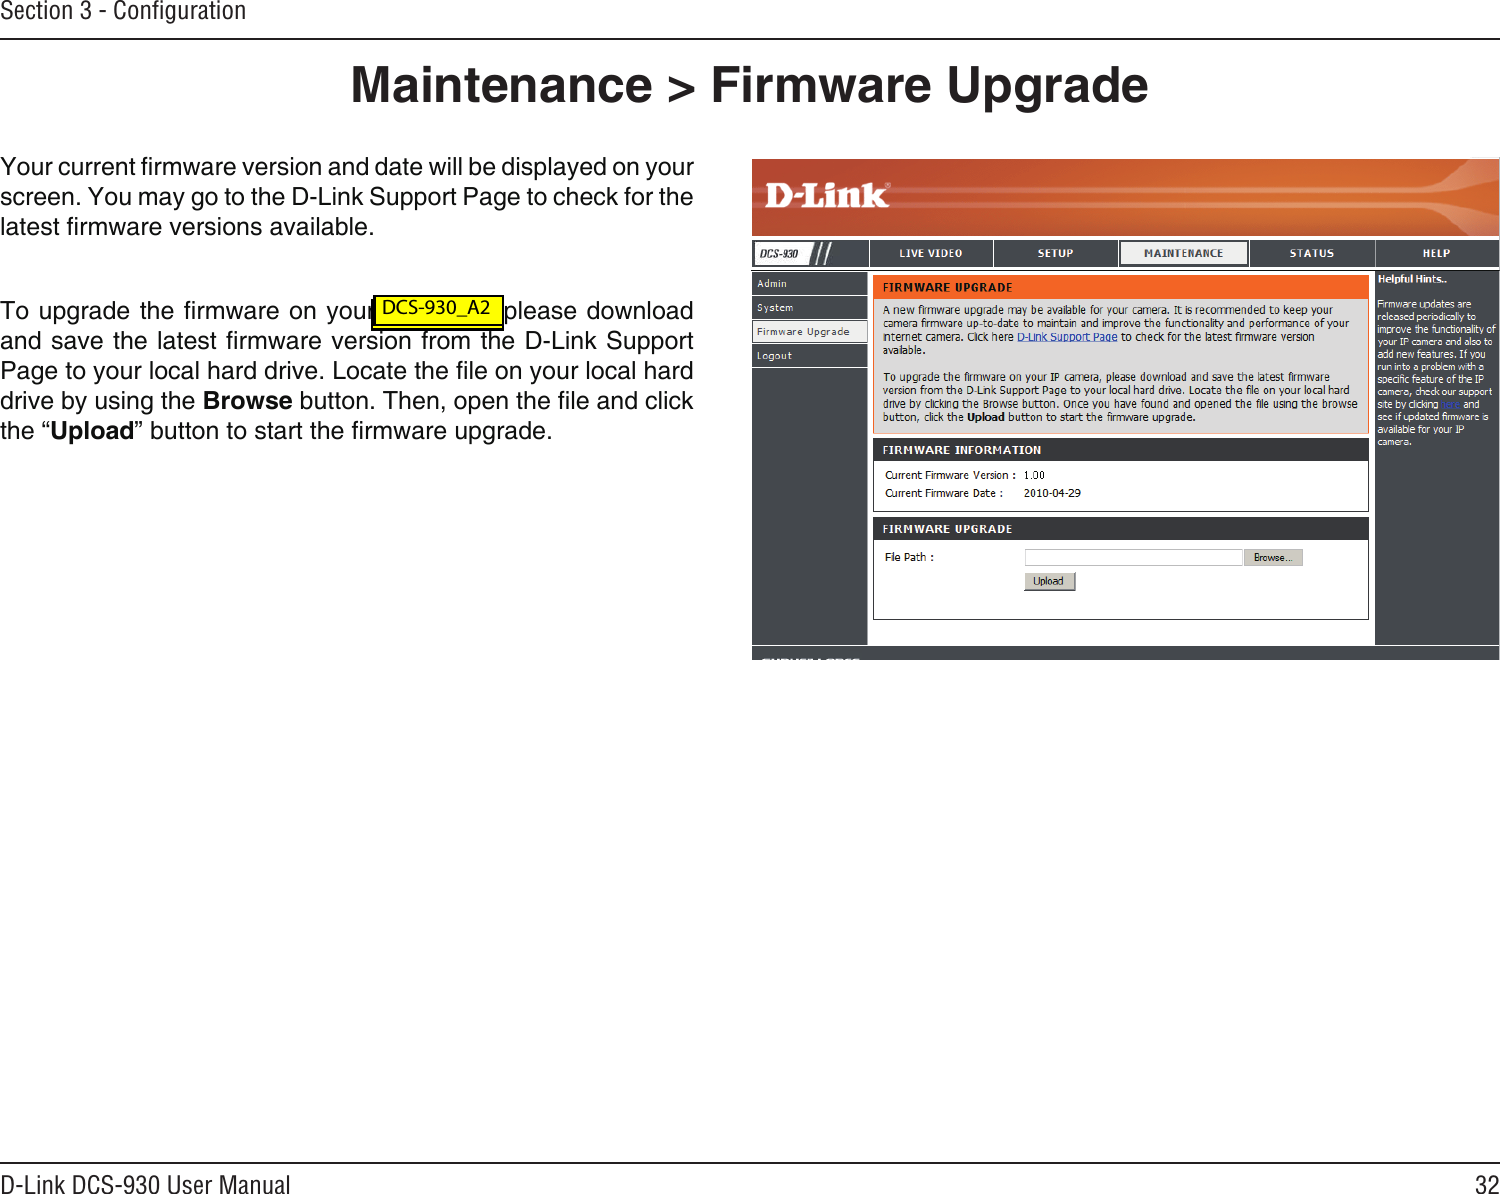 32D-Link DCS-930 User ManualSection 3 - ConﬁgurationMaintenance &gt; Firmware UpgradeYour current rmware version and date will be displayed on your screen. You may go to the D-Link Support Page to check for the latest rmware versions available. To upgrade the rmware on your DCS-930, please download and save the latest rmware version from the D-Link Support Page to your local hard drive. Locate the le on your local hard drive by using the Browse button. Then, open the le and click the “Upload” button to start the rmware upgrade. DCS-930L_A2 DCS-930_A2